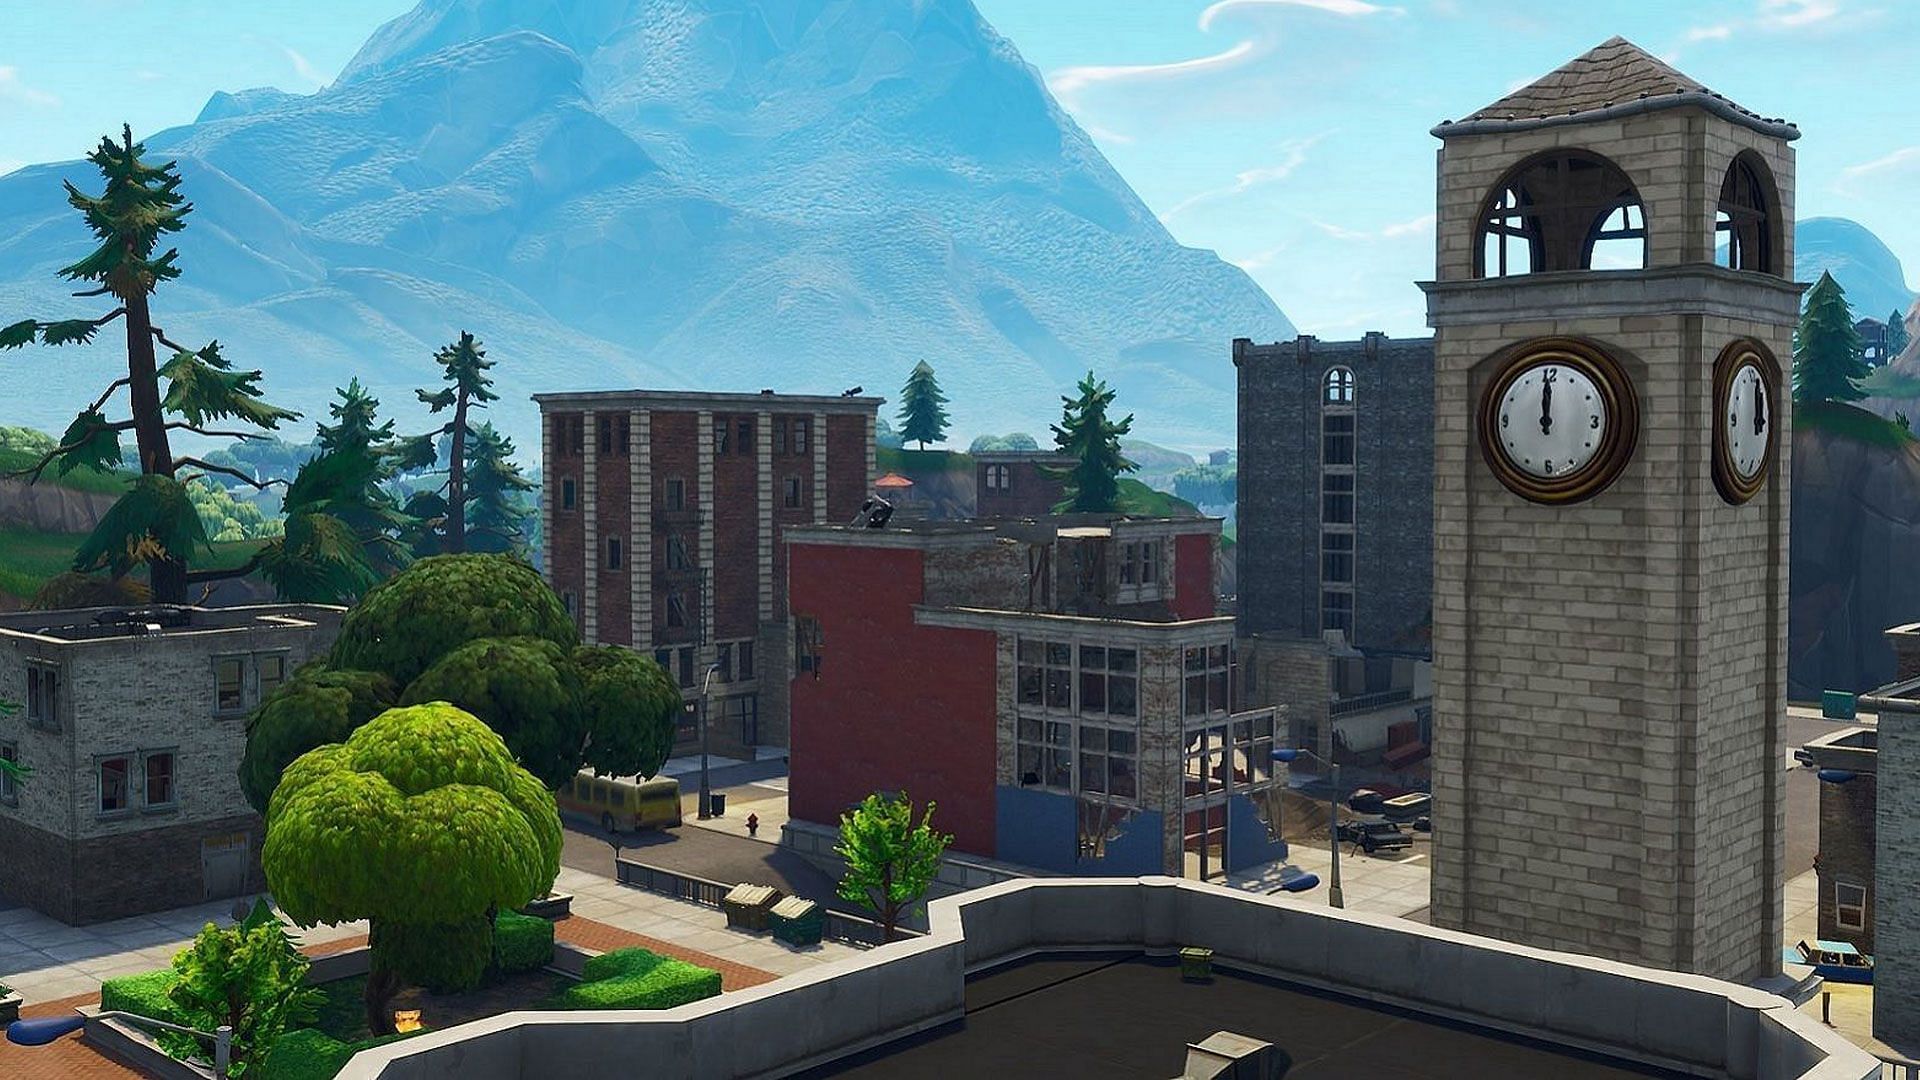 Tilted Towers might be destroyed in Fortnite Chapter 3 (Image via Epic Games)